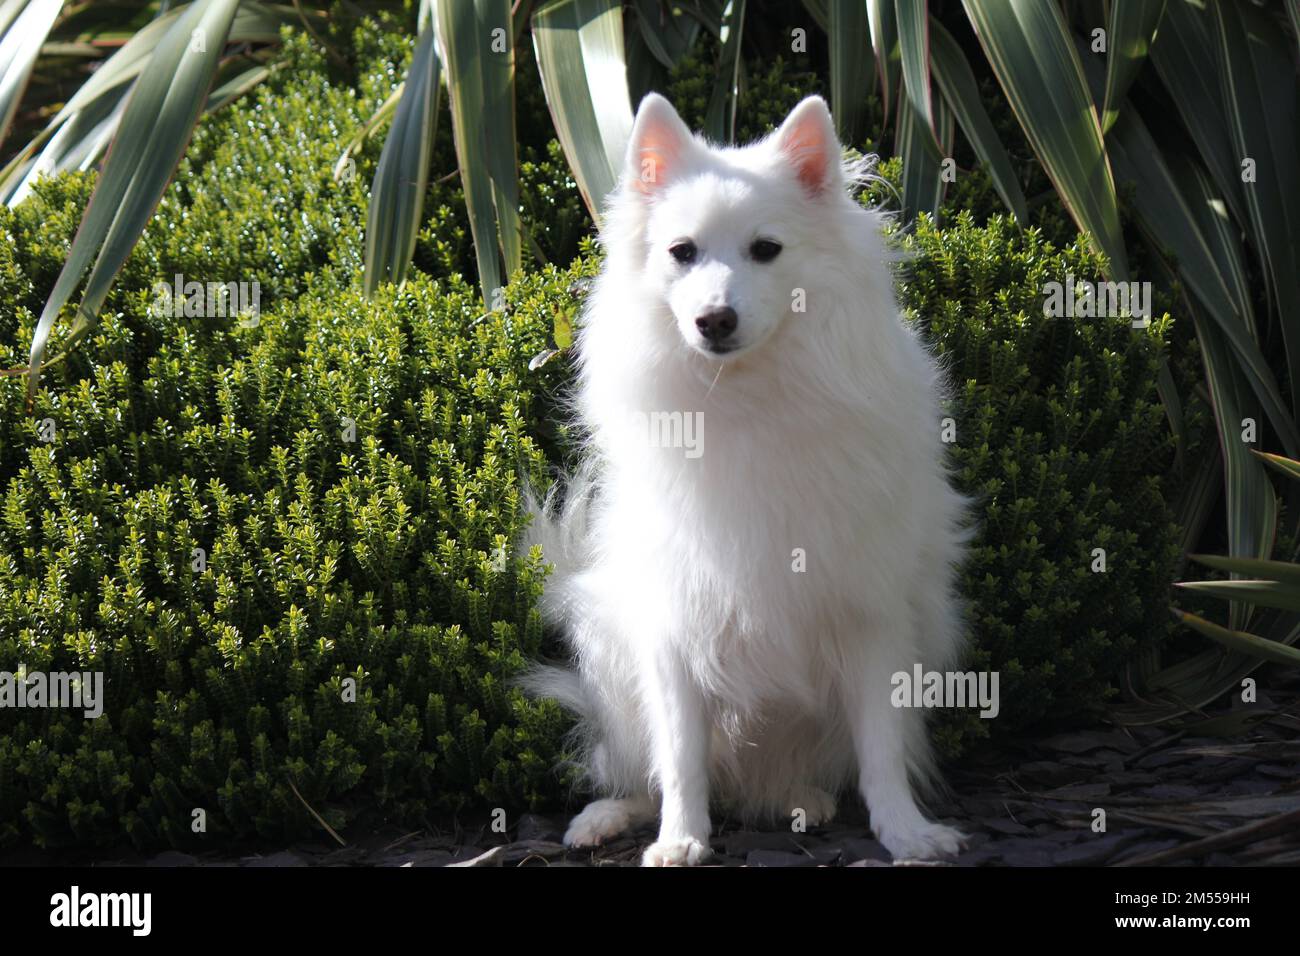 An American Eskimo dog resting in the park with bushes and plants in the background Stock Photo